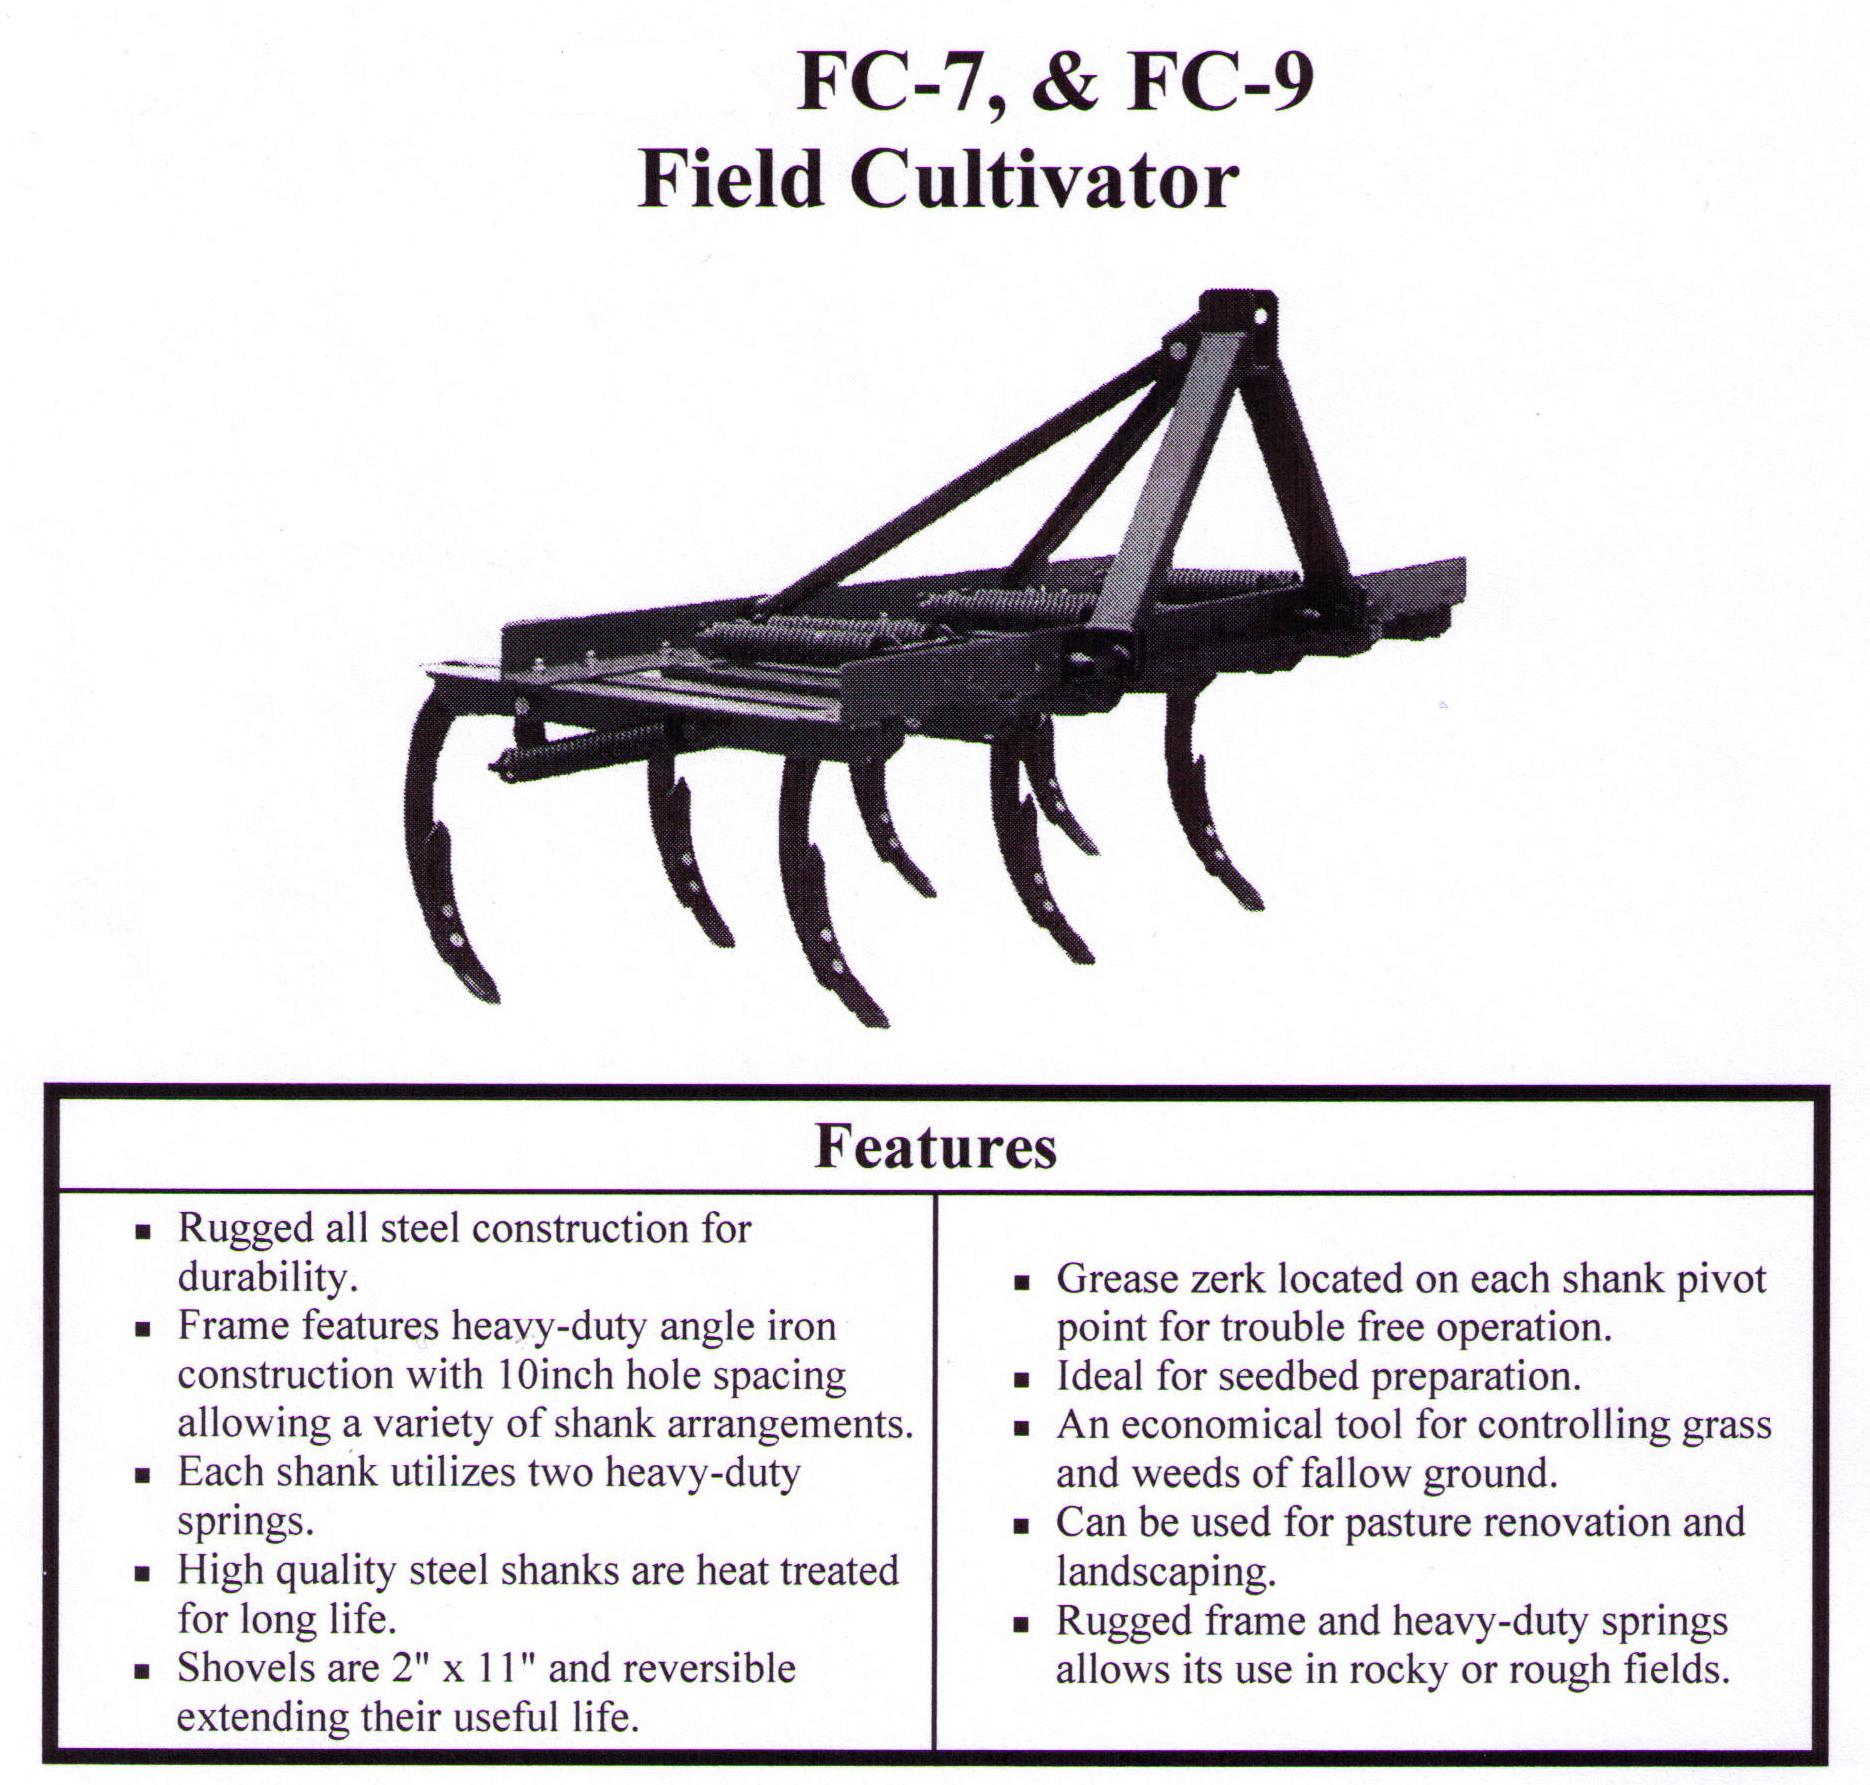 Field Cultivator Features